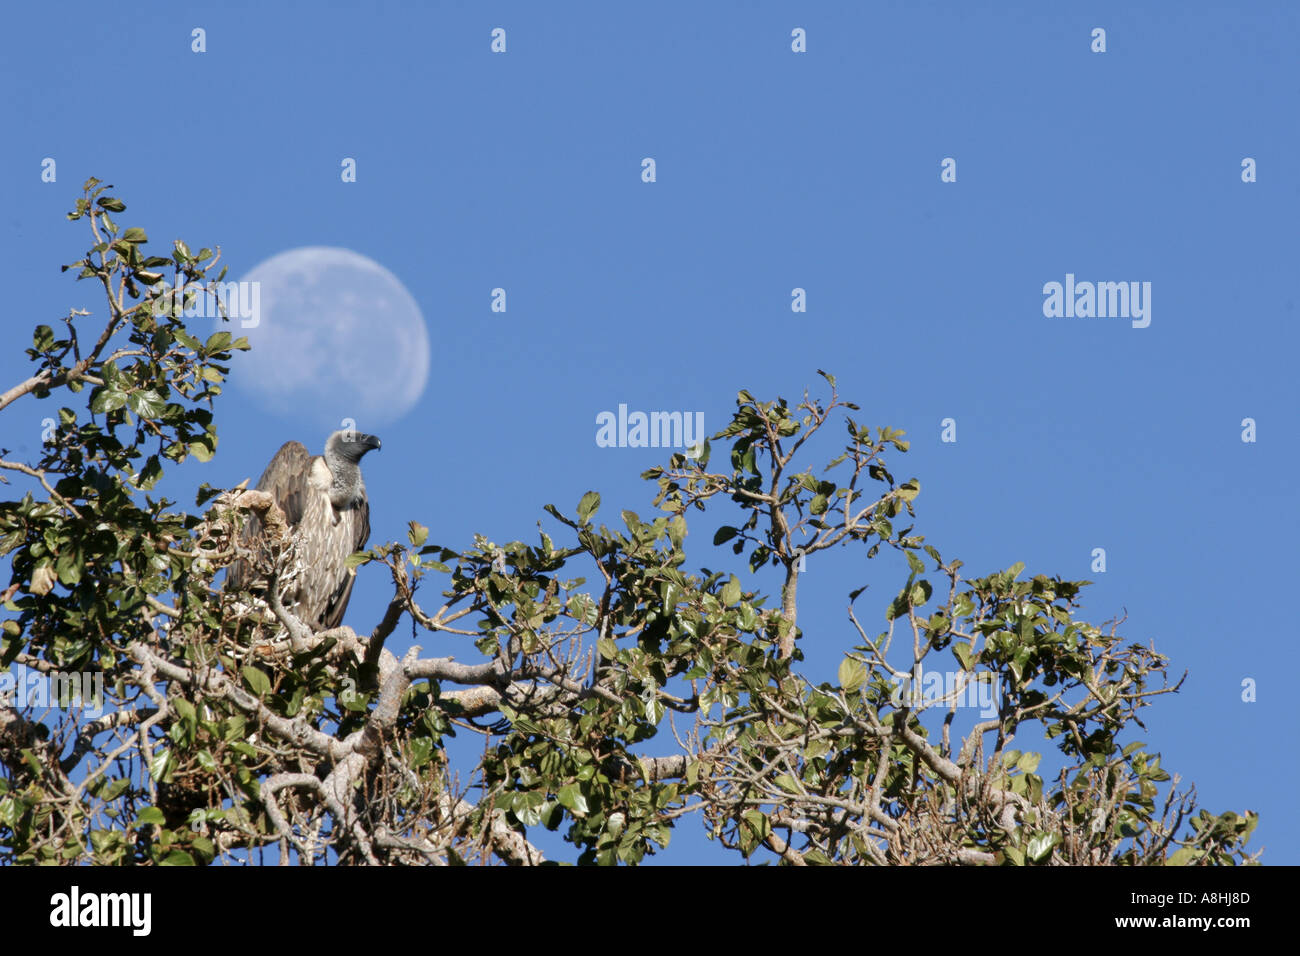 Vulture in the tree tops with moon in the background Stock Photo